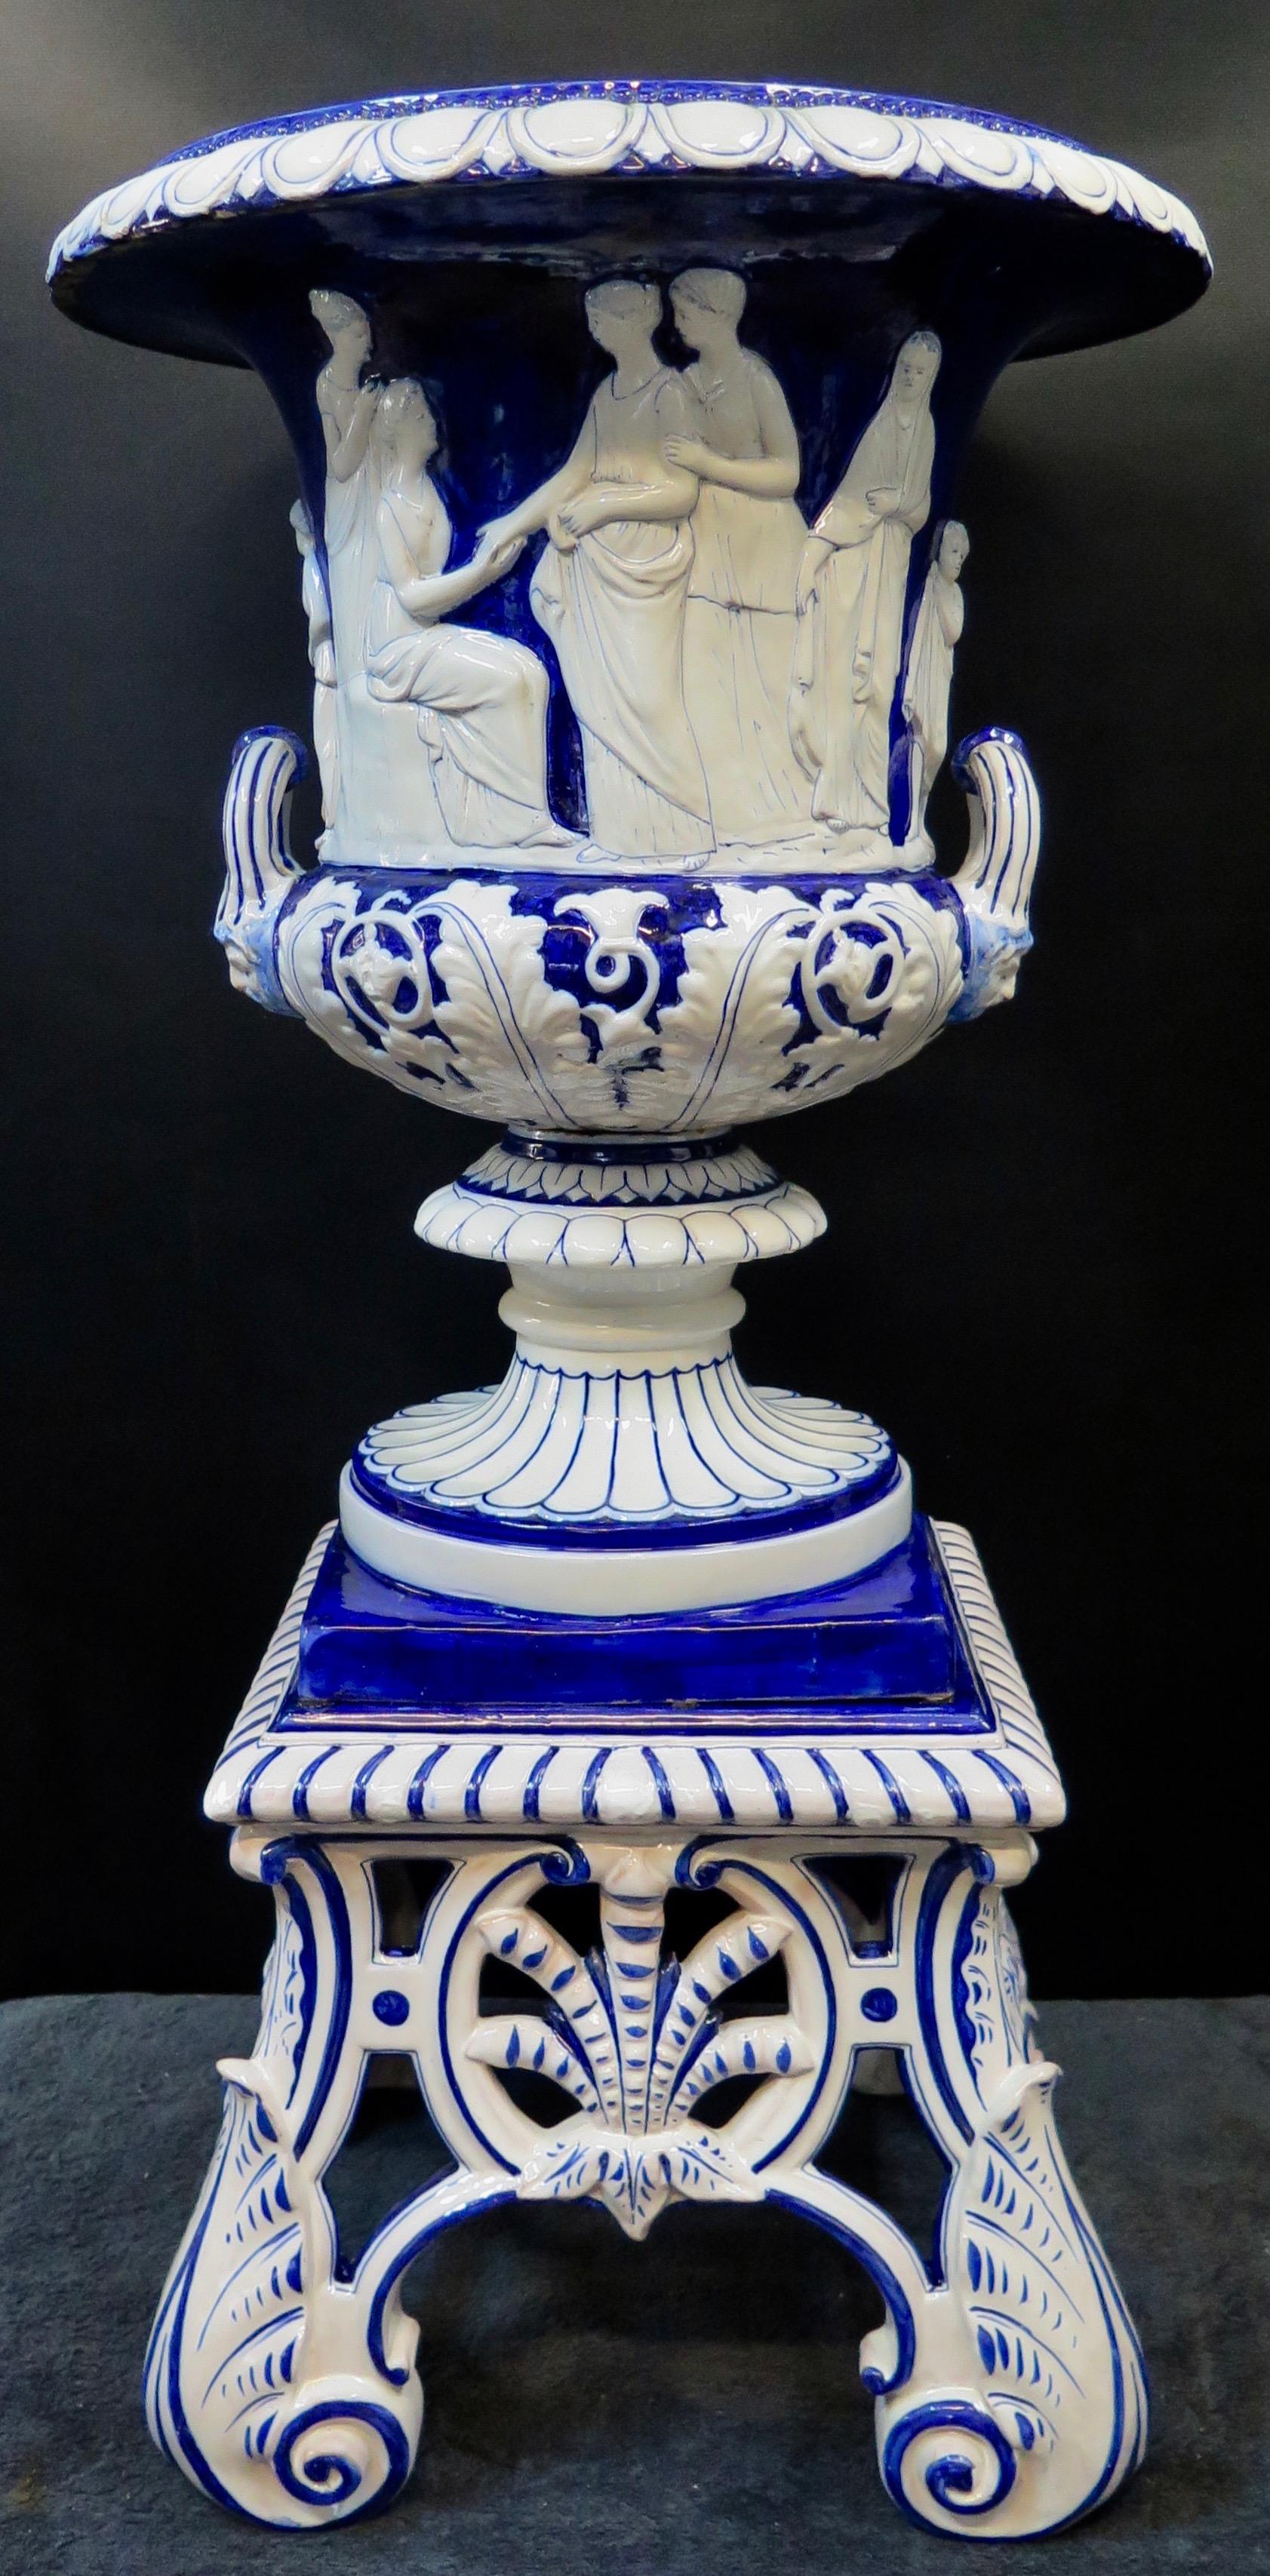 This early 20th century Continental terracotta planter is designed in a rich high glaze cobalt blue and white finish. The body of the planter features decorative applied handles that accent a frieze of women encircling the midpoint. This classical